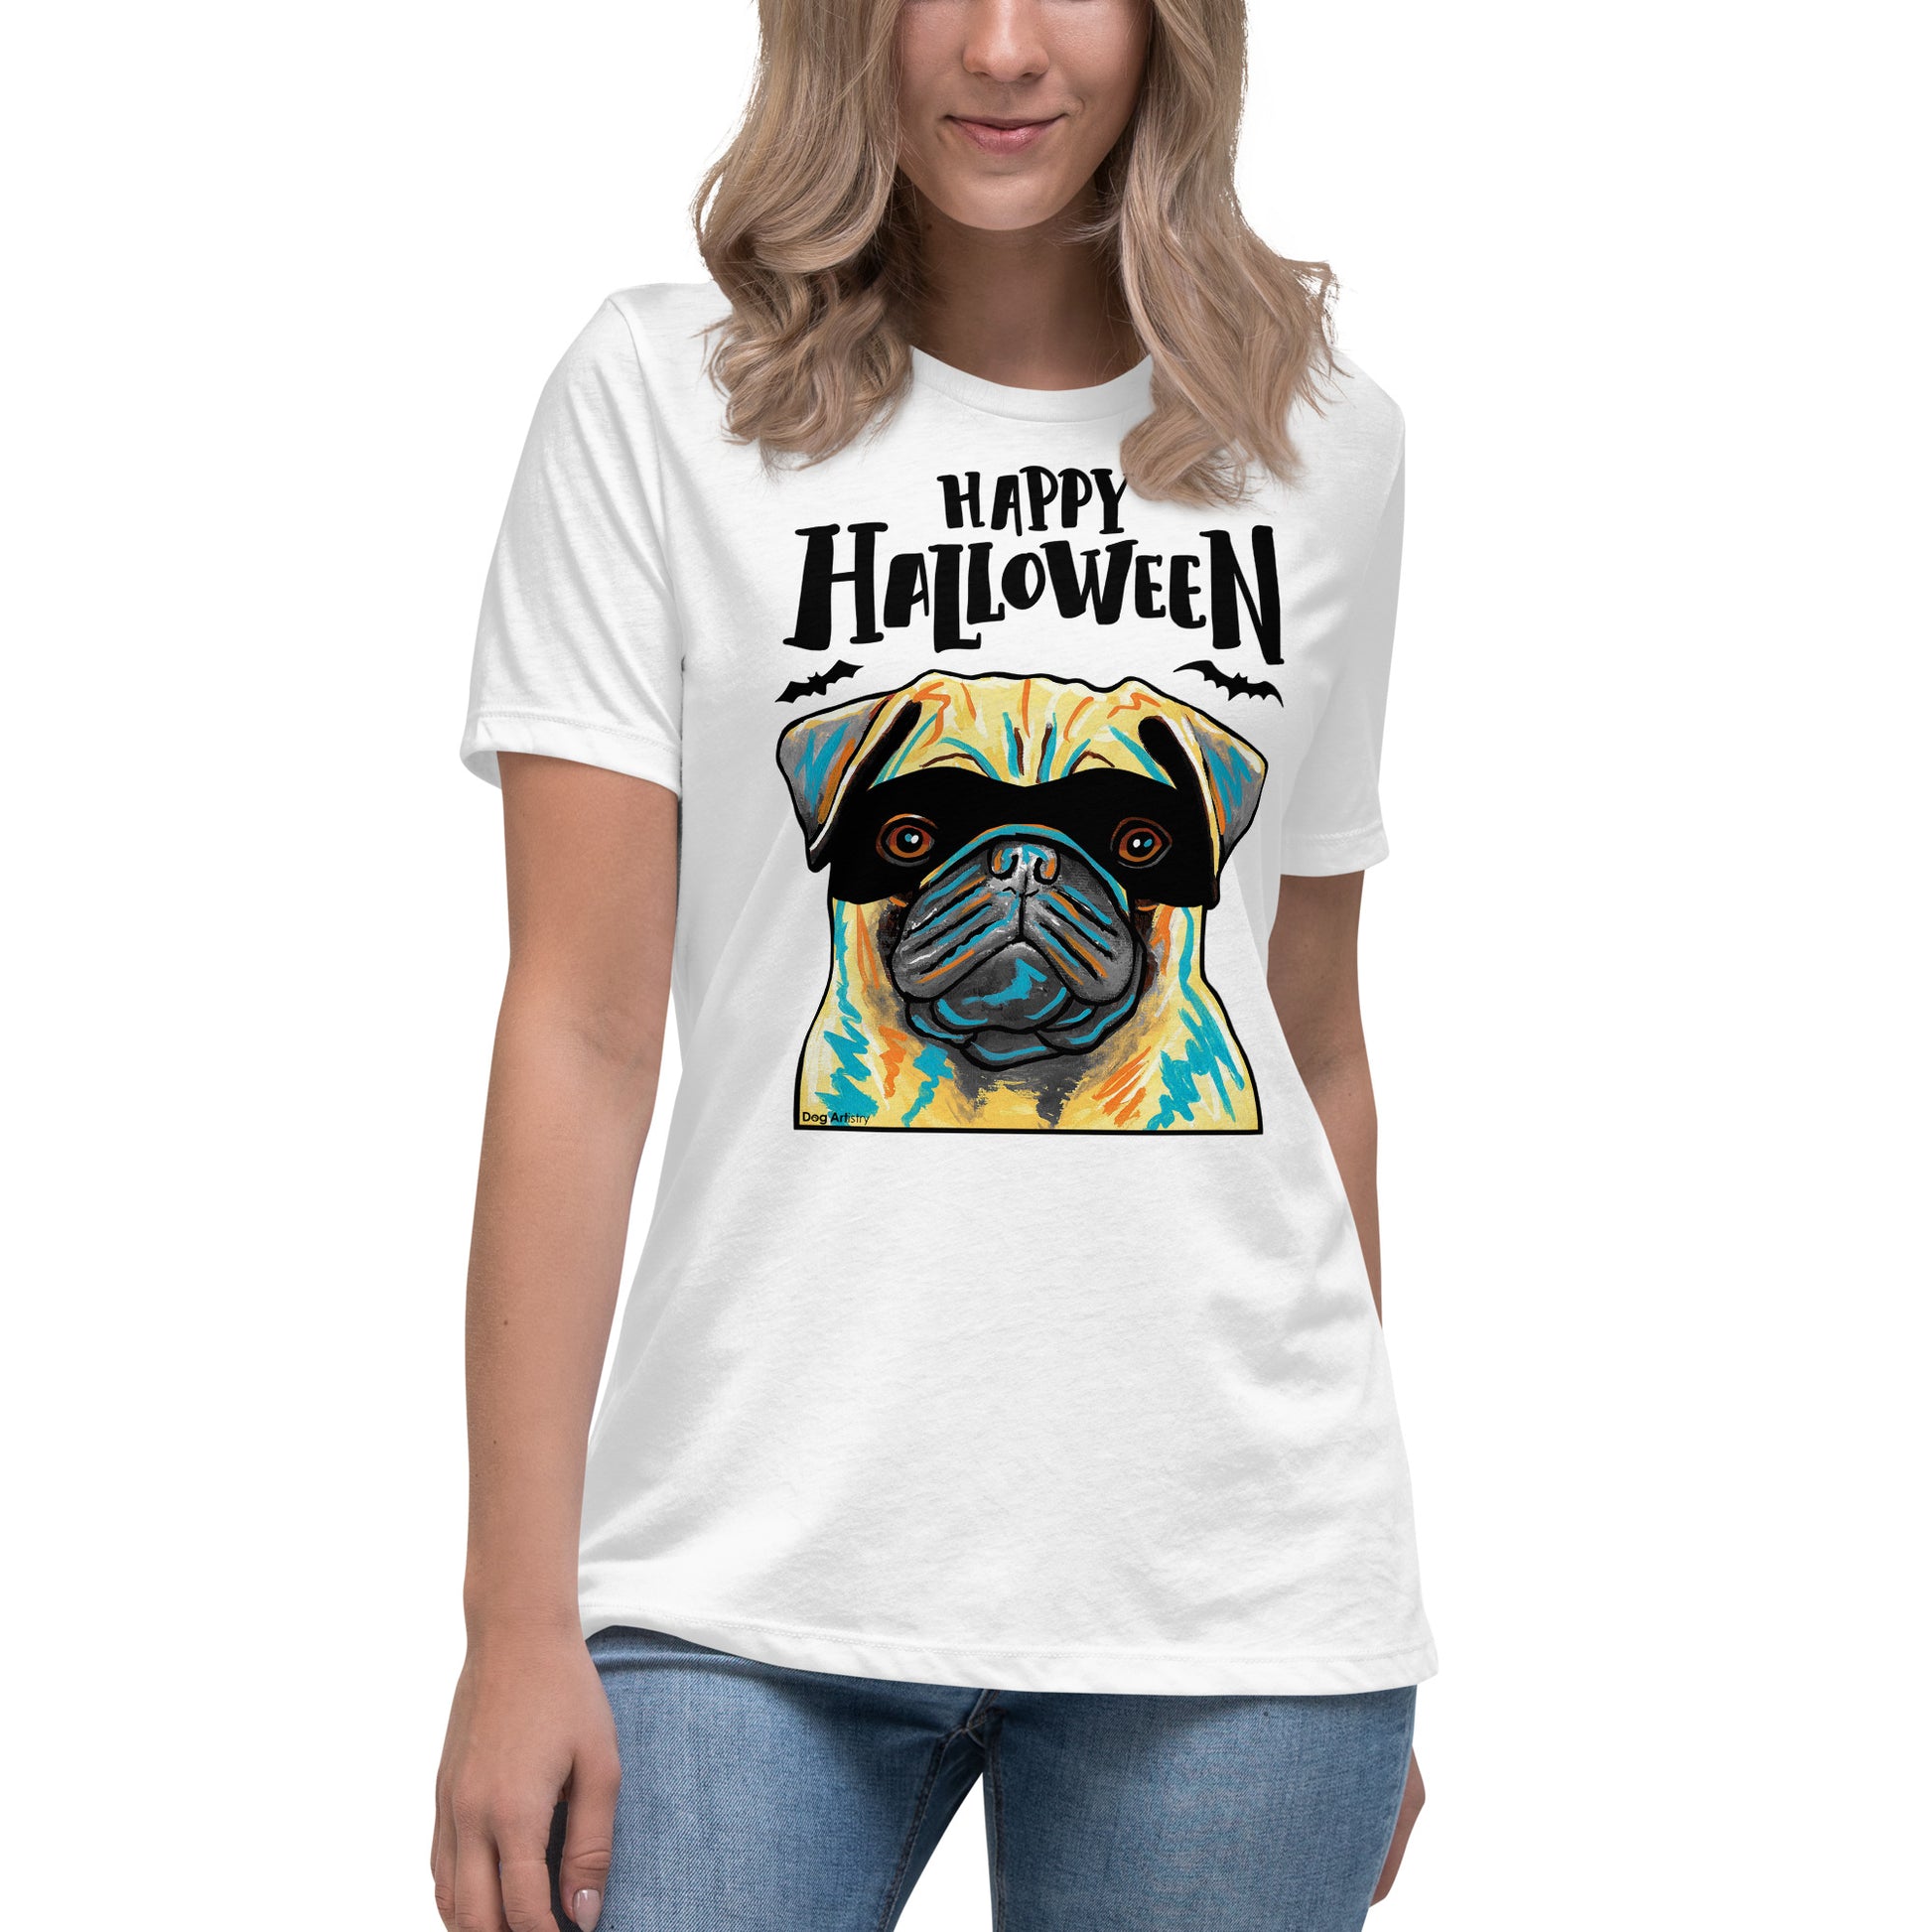 Funny Happy Halloween Pug wearing mask women’s white t-shirt by Dog Artistry.